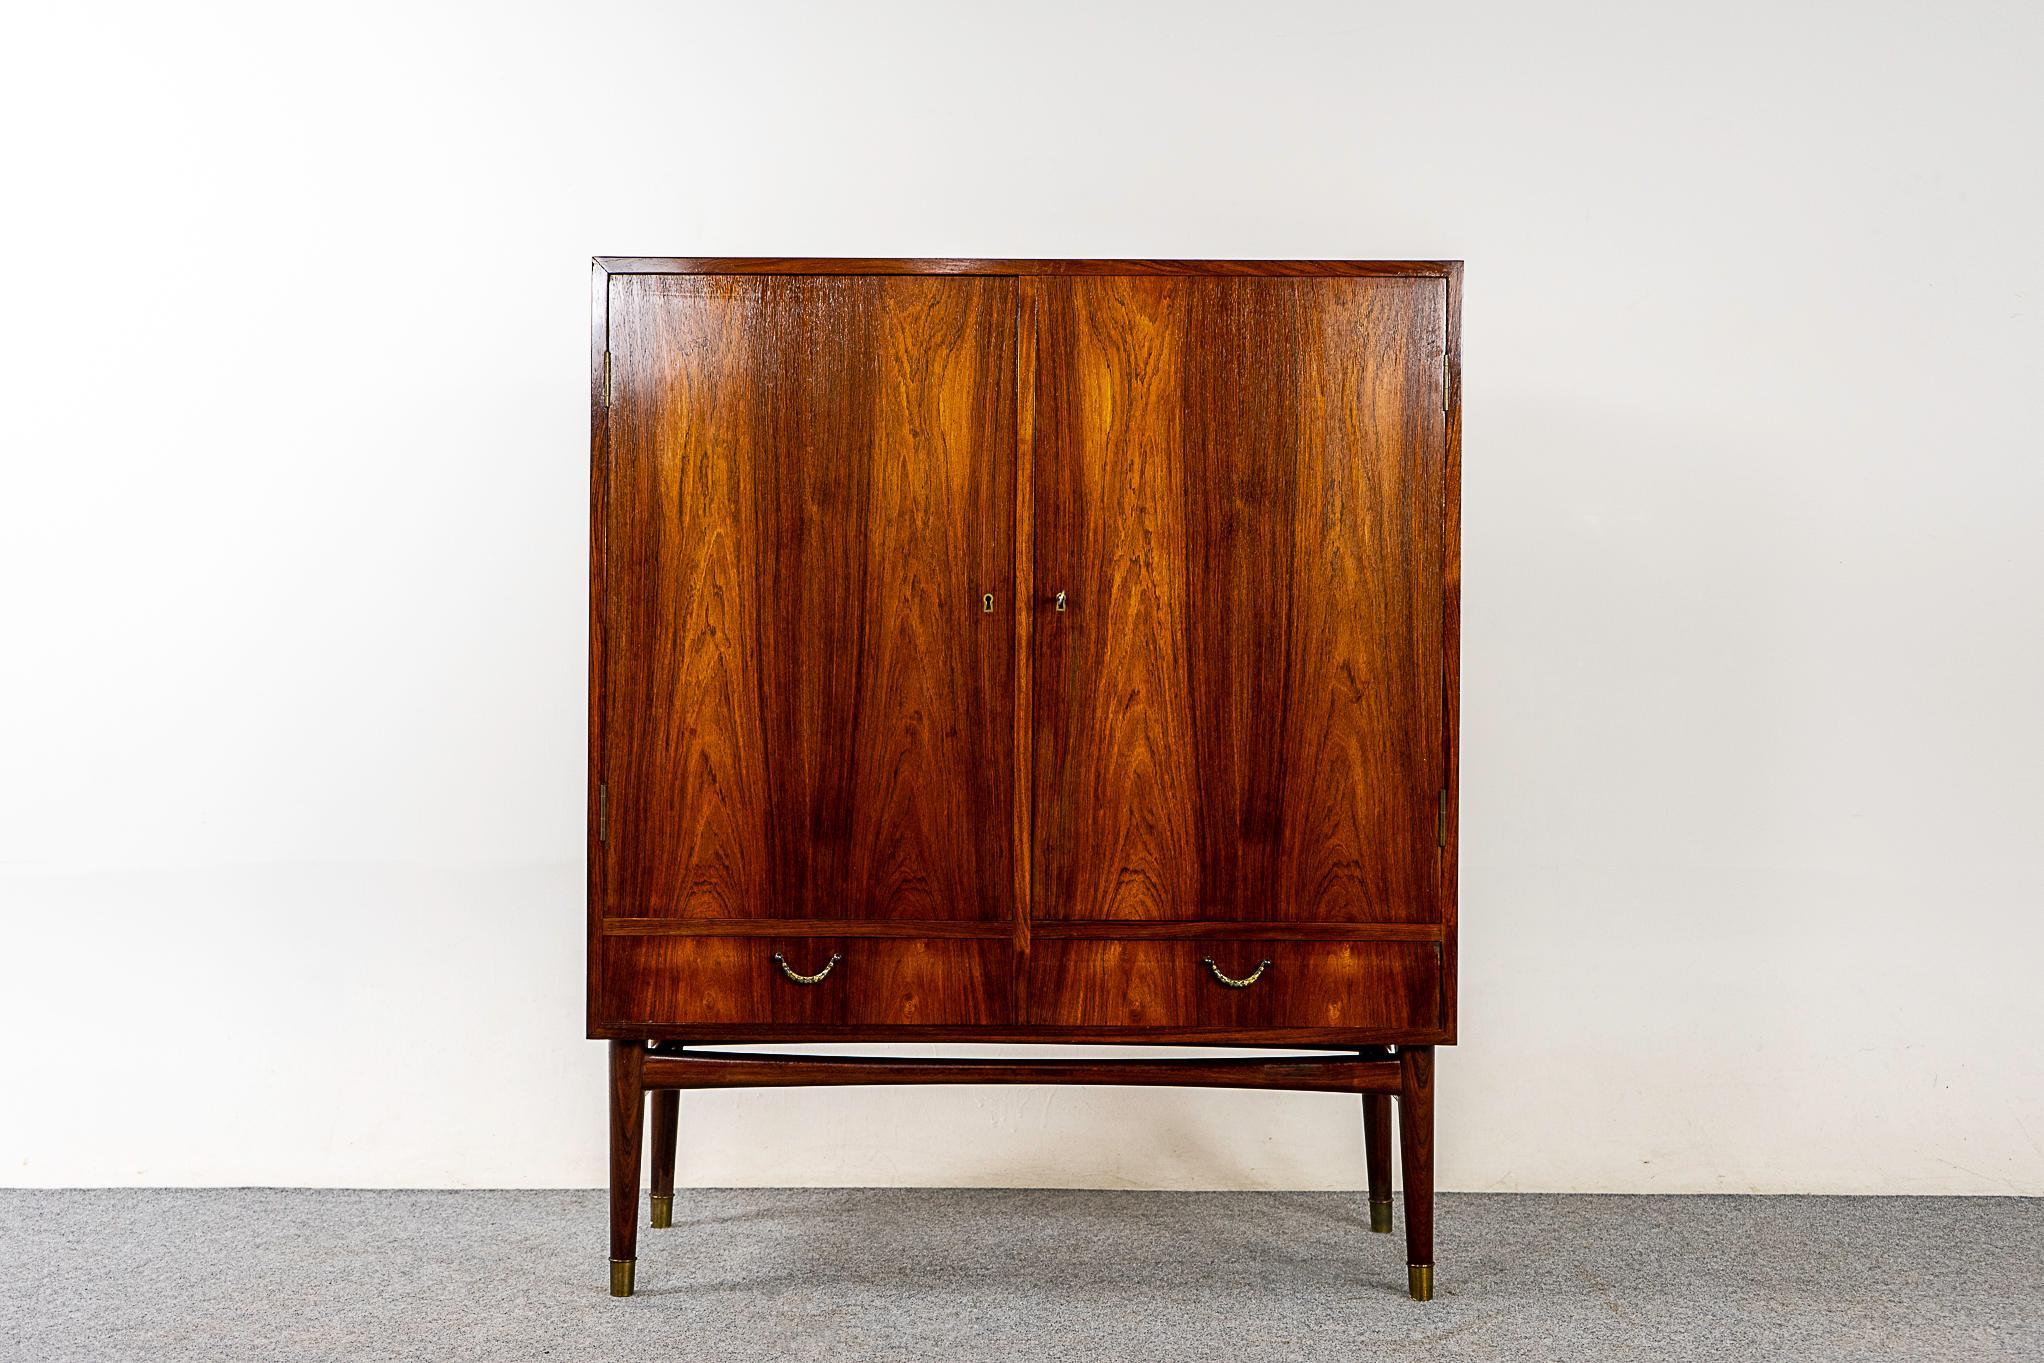 Rosewood Danish cabinet, circa 1960's. A combination of exterior doors and drawers offers ample storage. Interior shows adjustable shelving and small interior drawers.

Unrestored item with option to purchase in restored condition for an additional